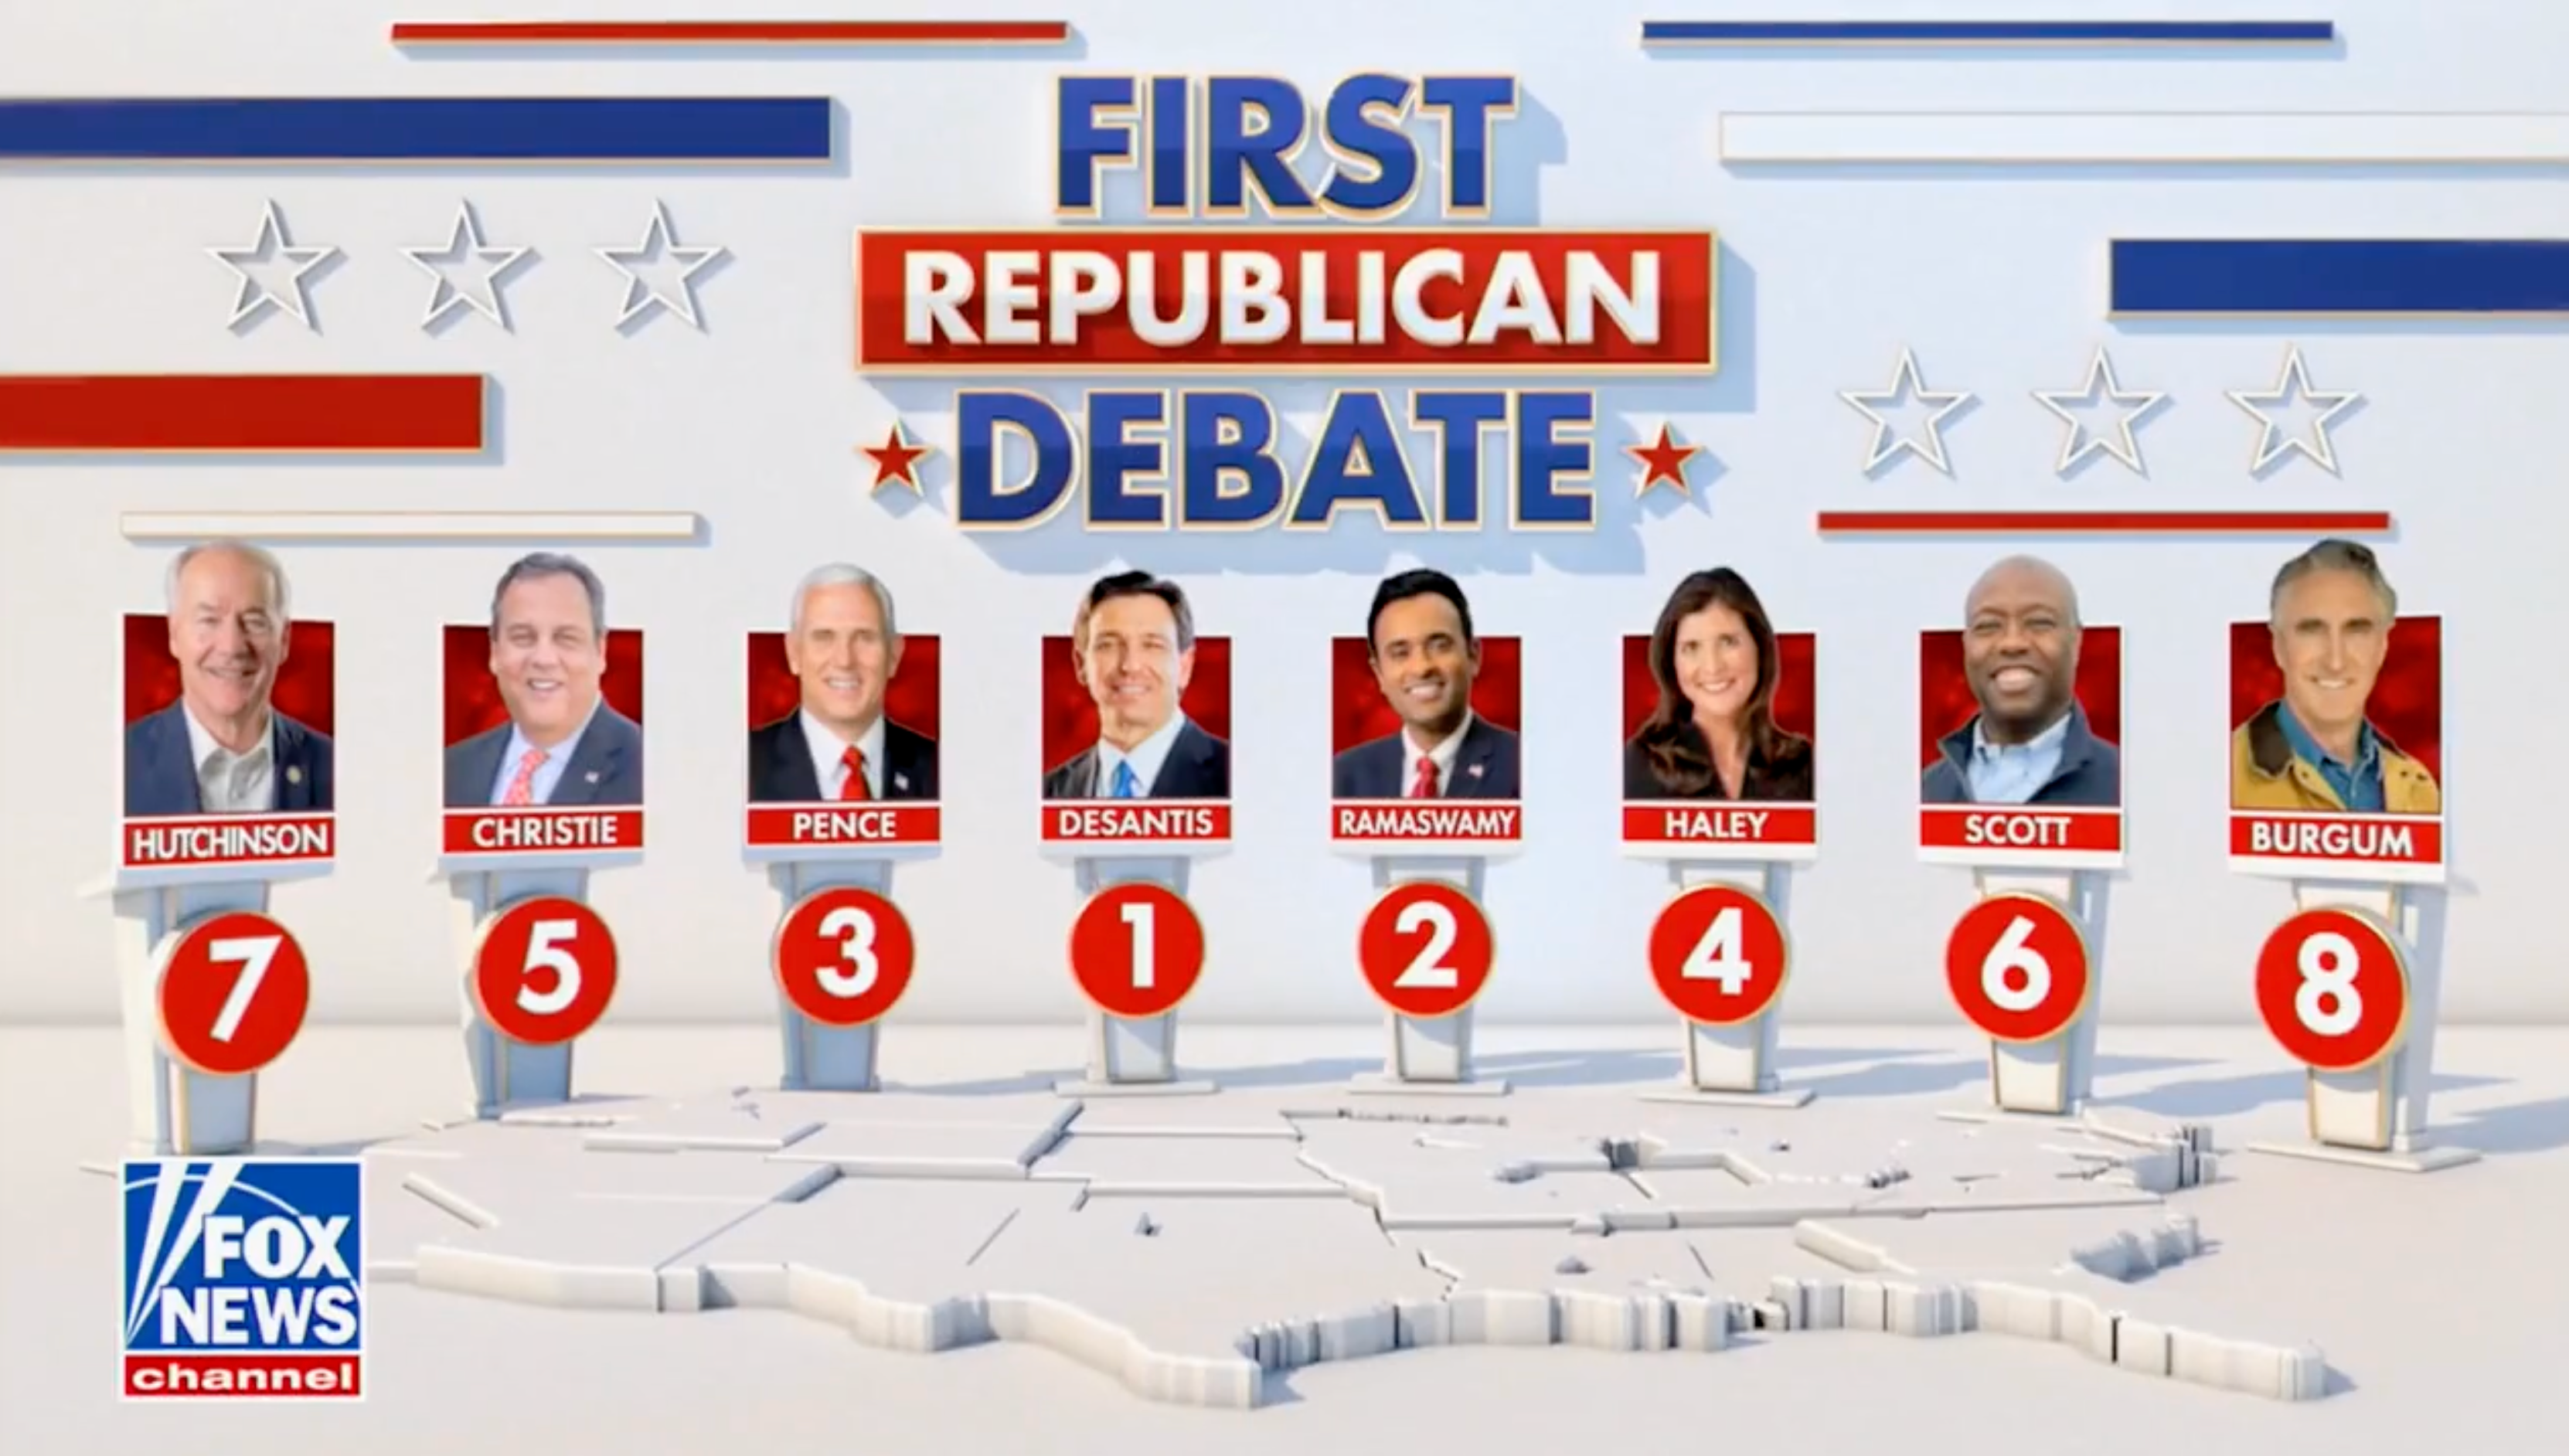 Fox News and the Republican National Committee revealed the line-up for the first GOP debate of the 2024 presidential primary season, to be held on 23 August in Milwaukee, Wisconsin